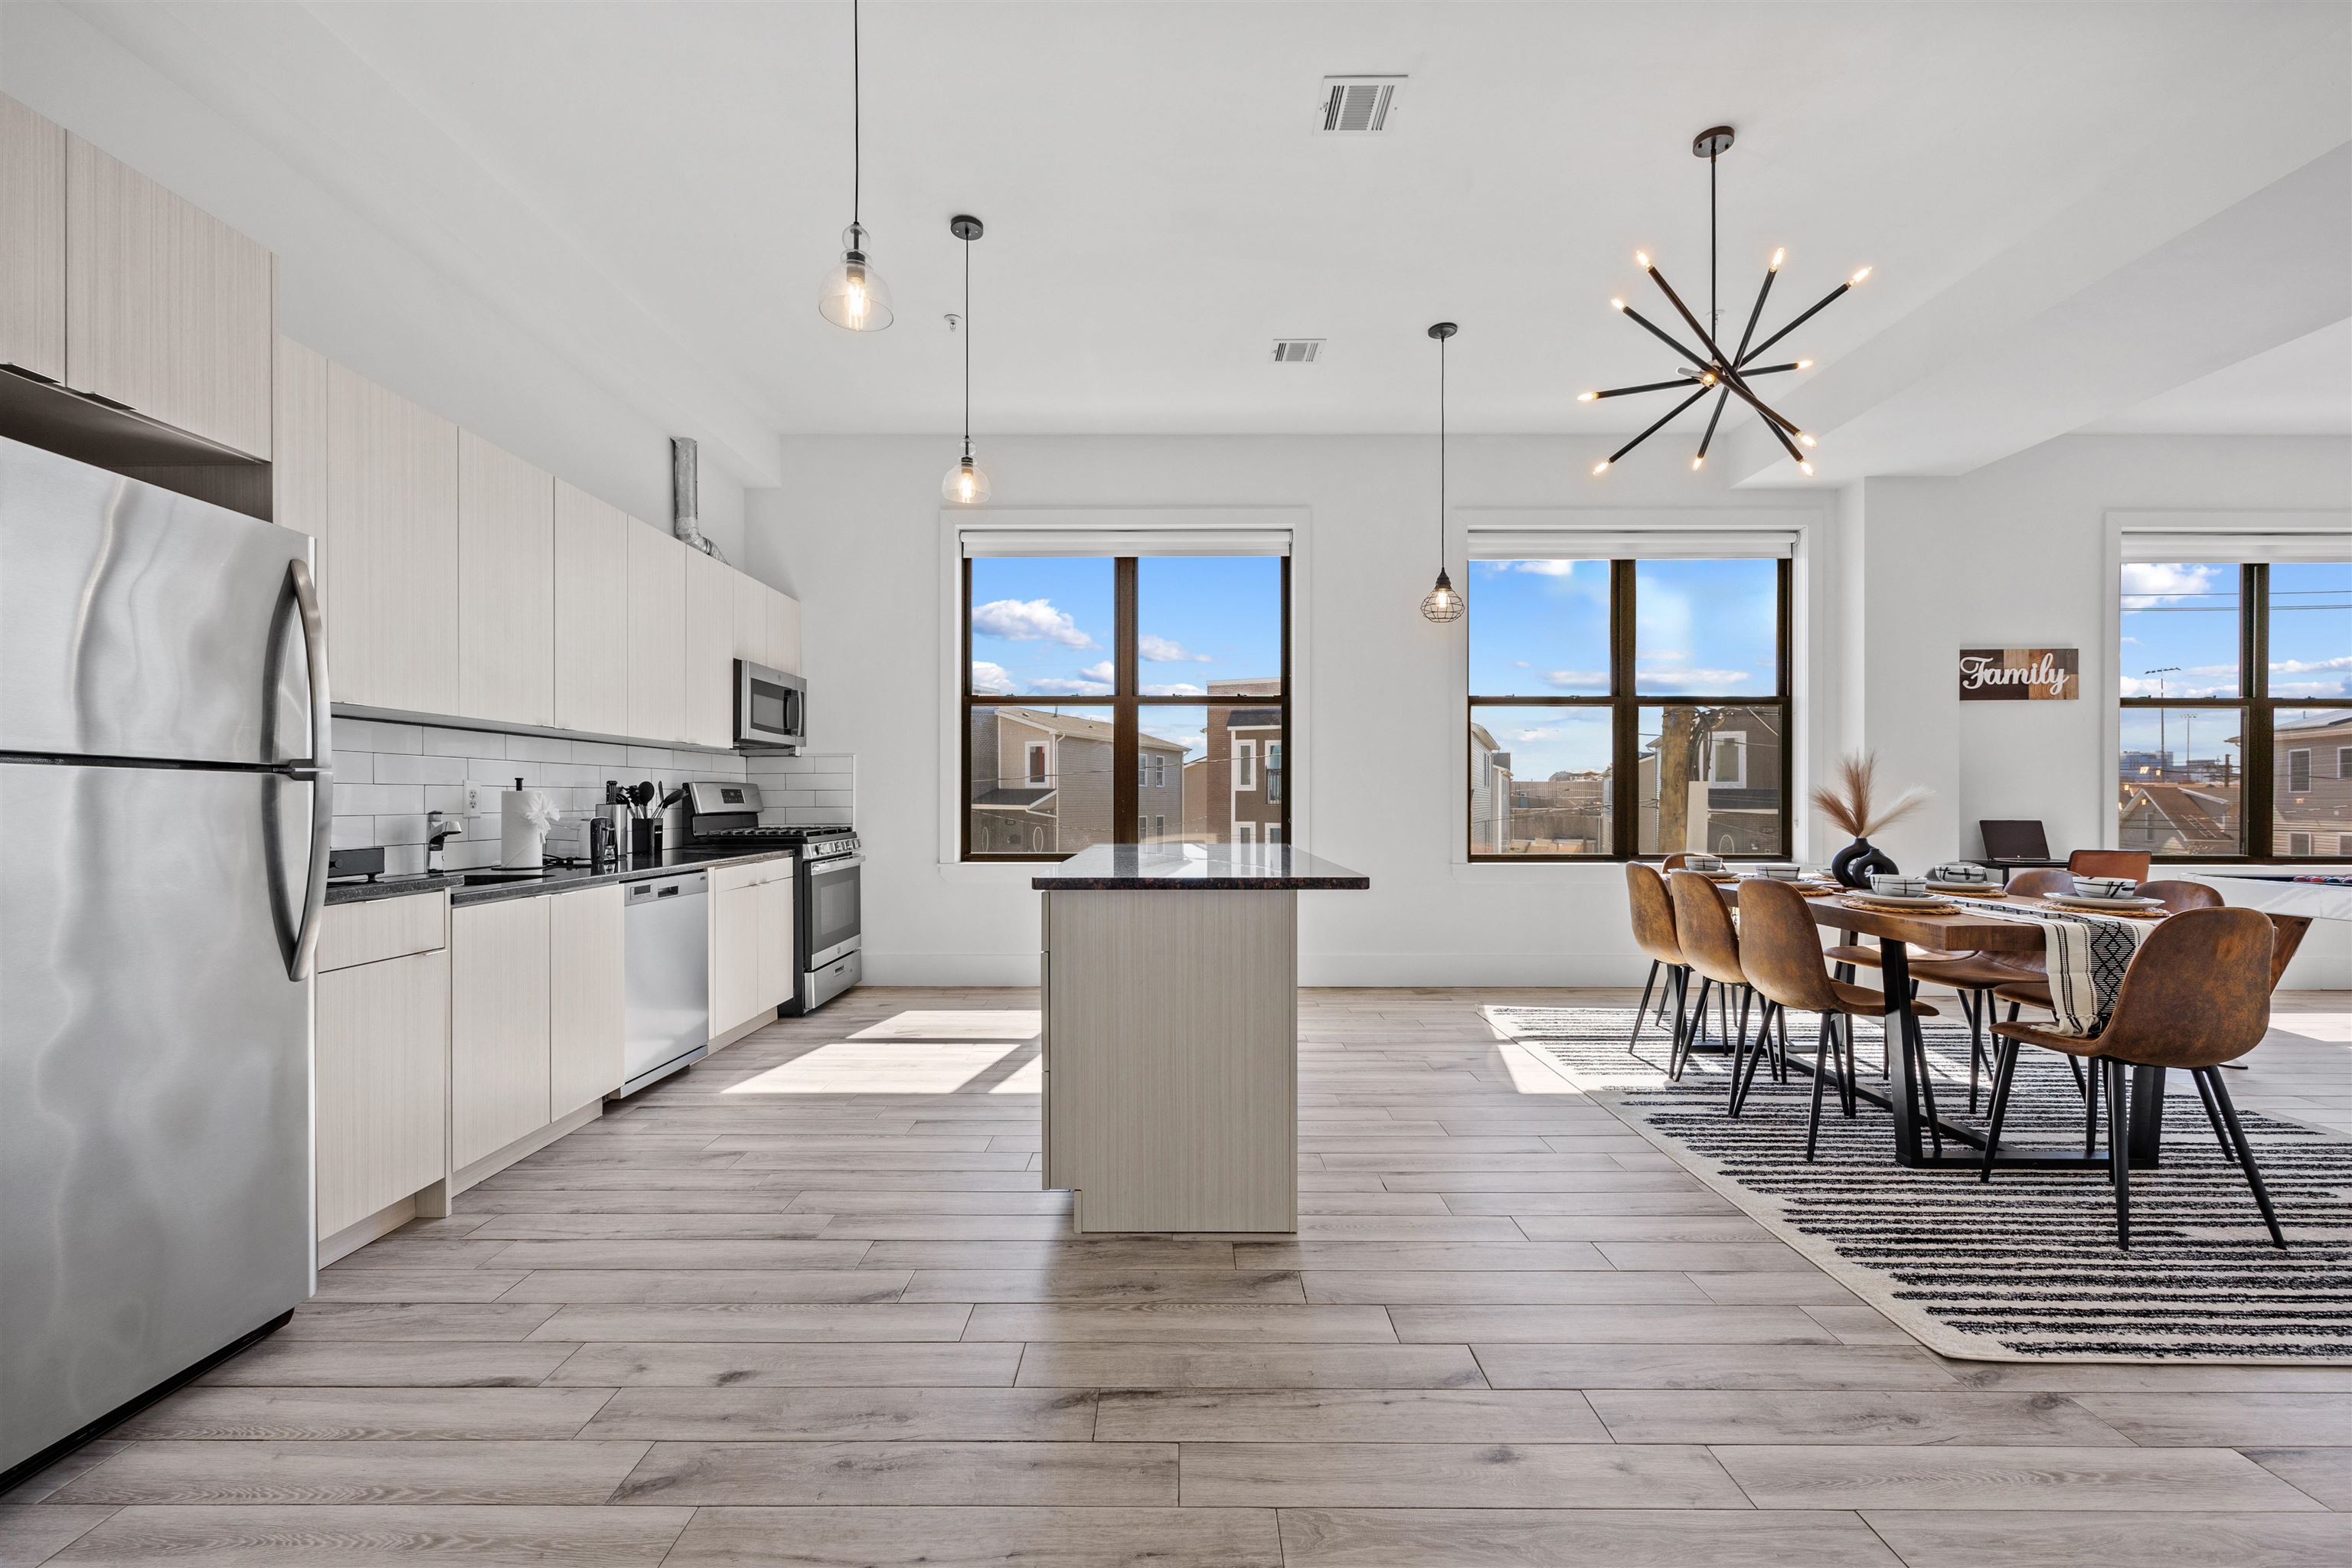 a kitchen with stainless steel appliances granite countertop a refrigerator a stove top oven a sink dishwasher a dining table and chairs with wooden floor